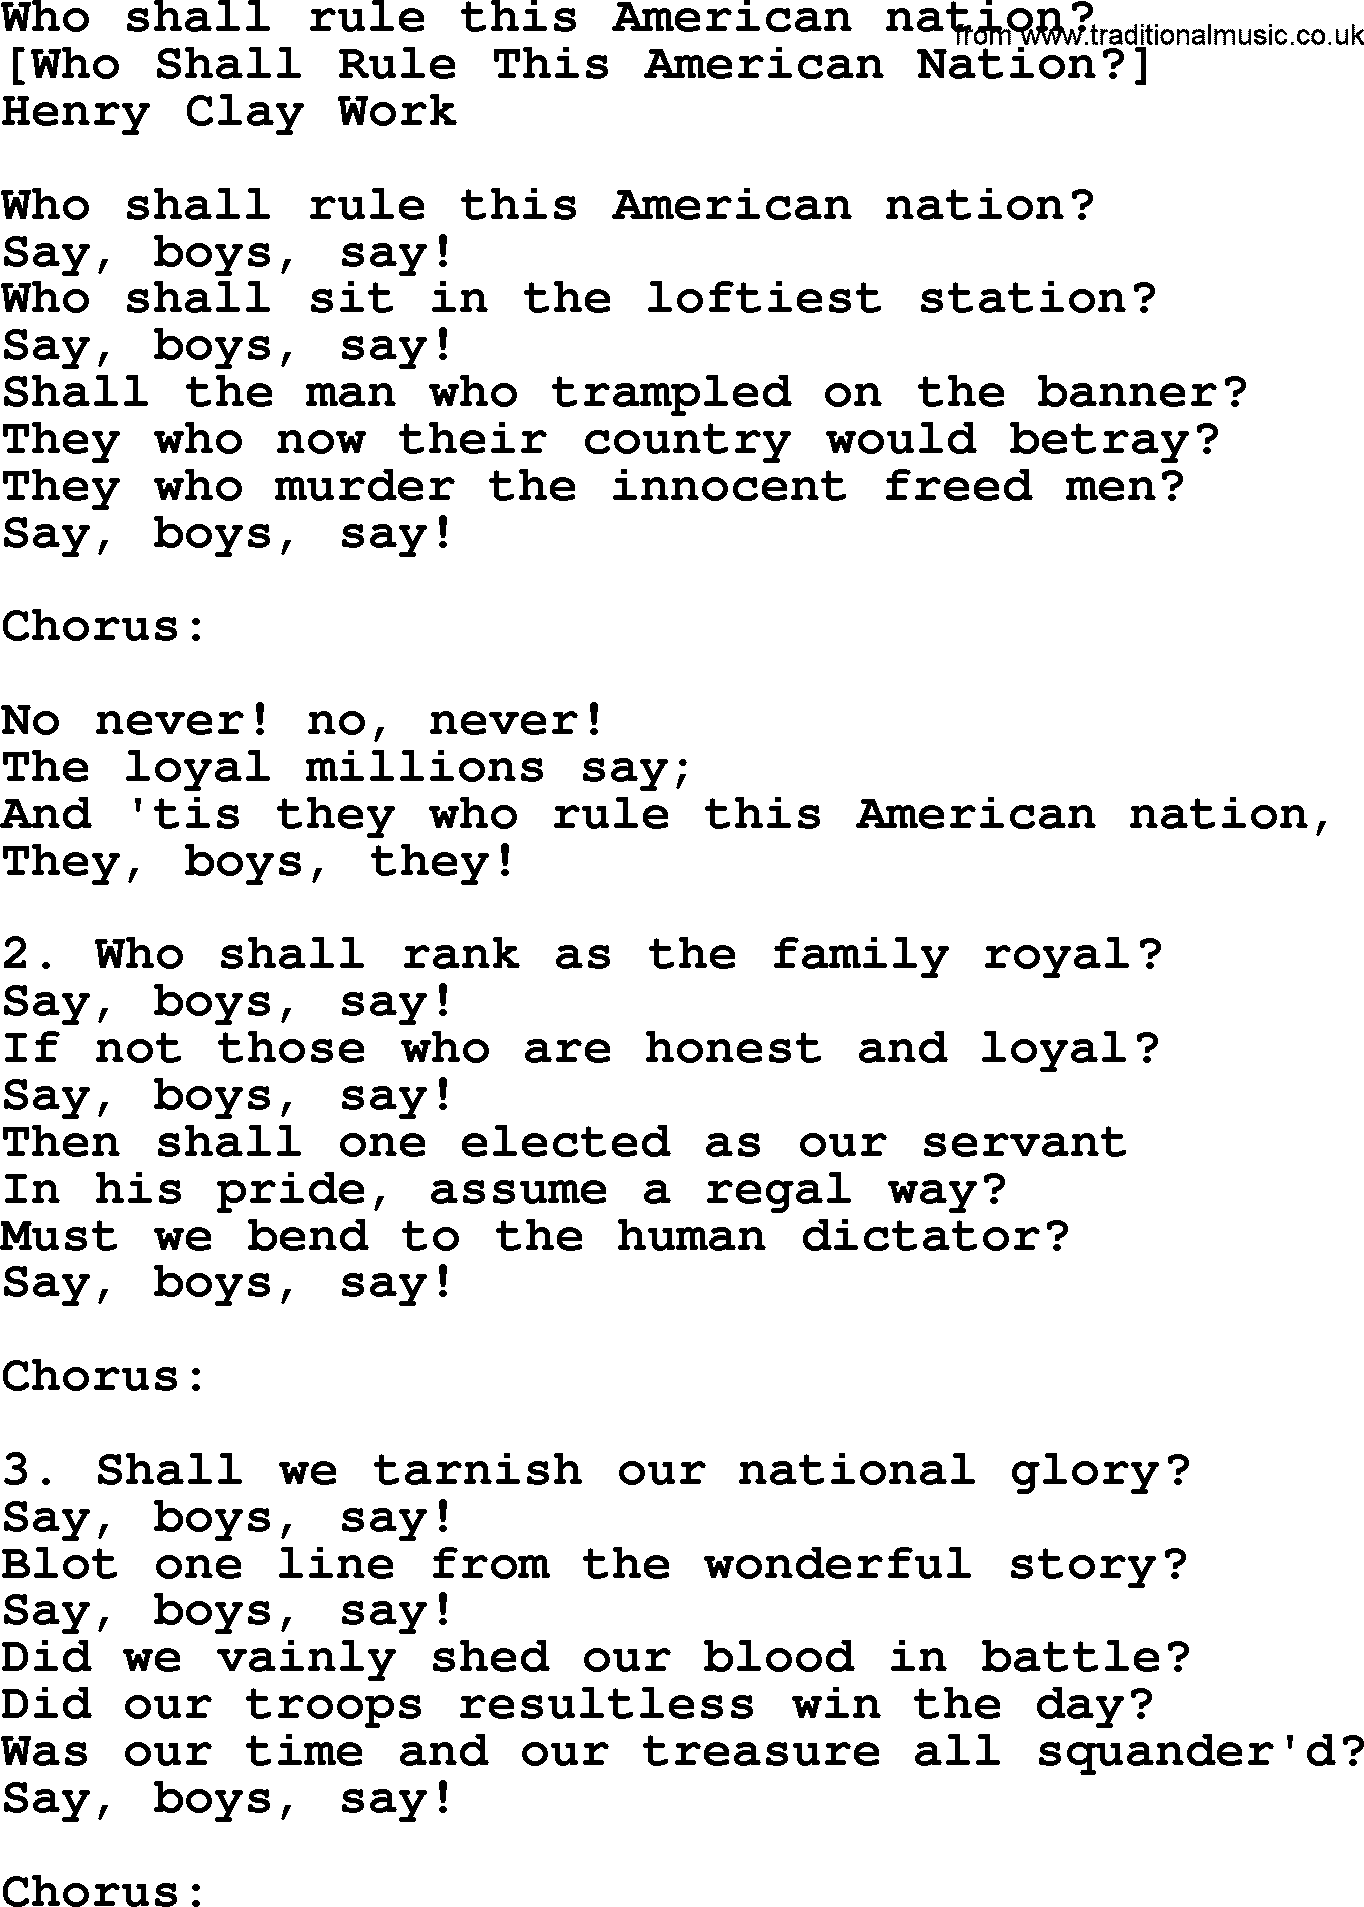 Old American Song: Who Shall Rule This American Nation, lyrics